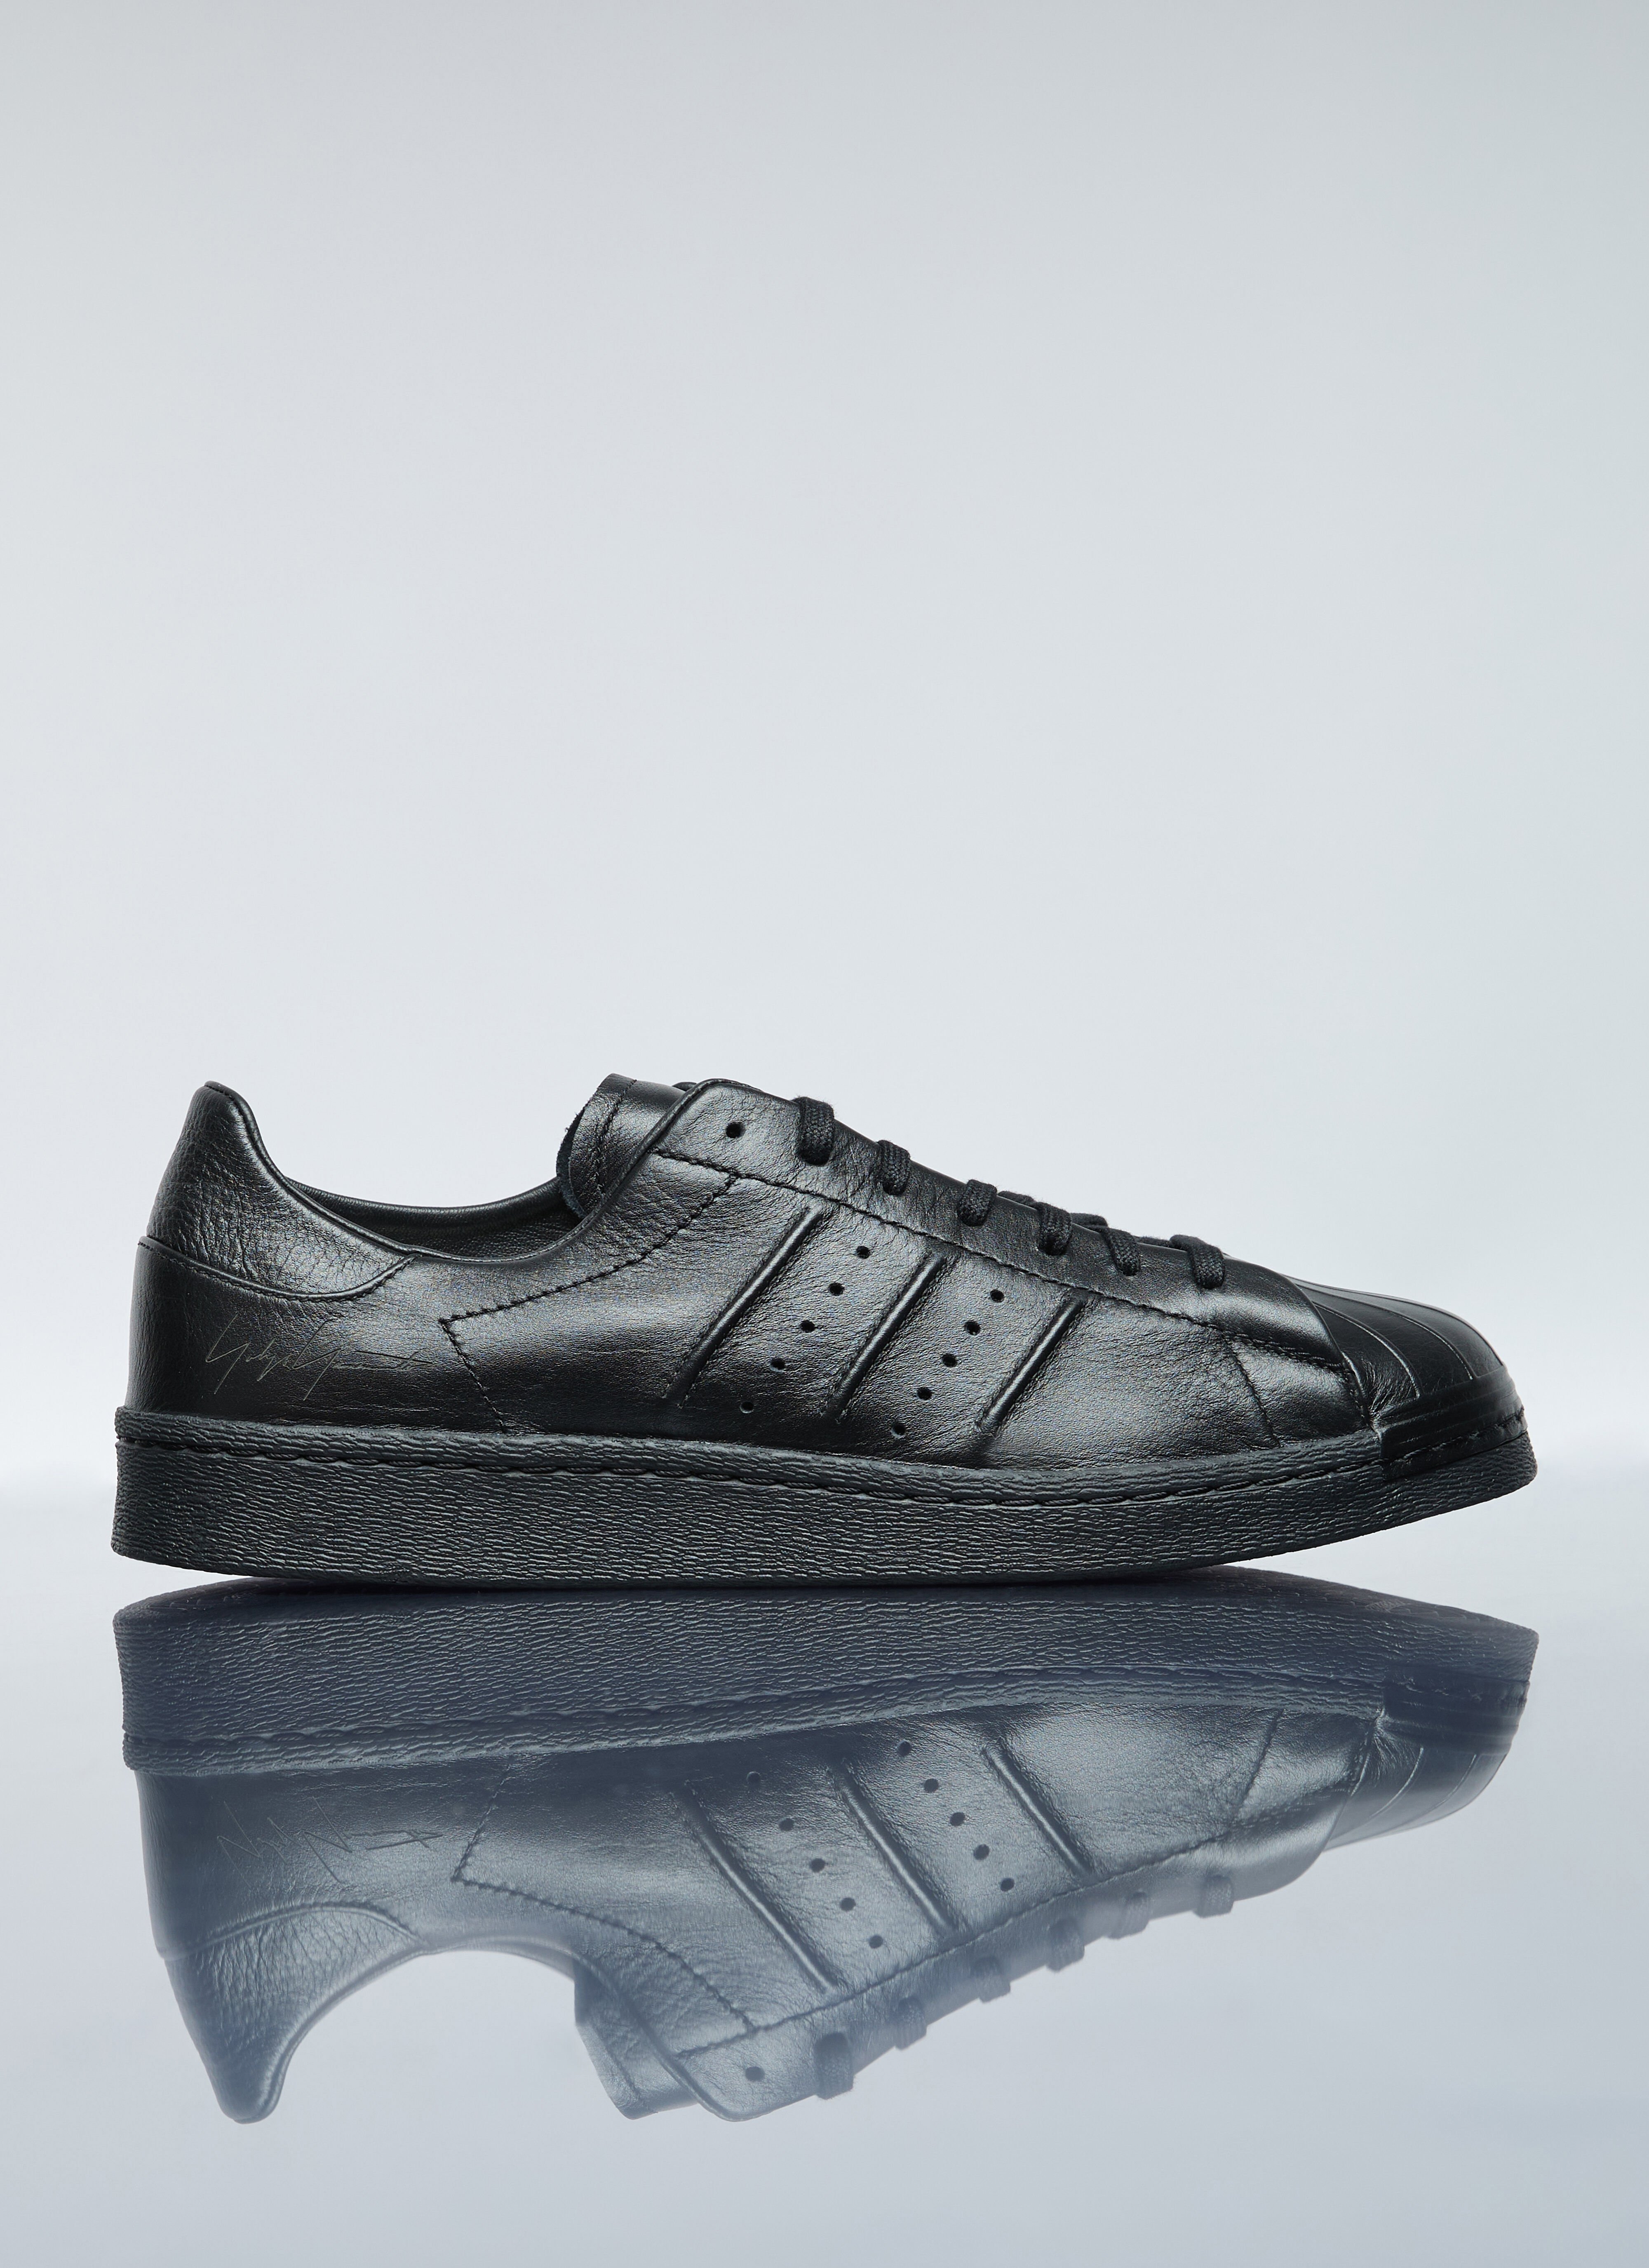 adidas x DINGYUN ZHANG Y-3 Superstar Leather Sneaker Black ady0157001